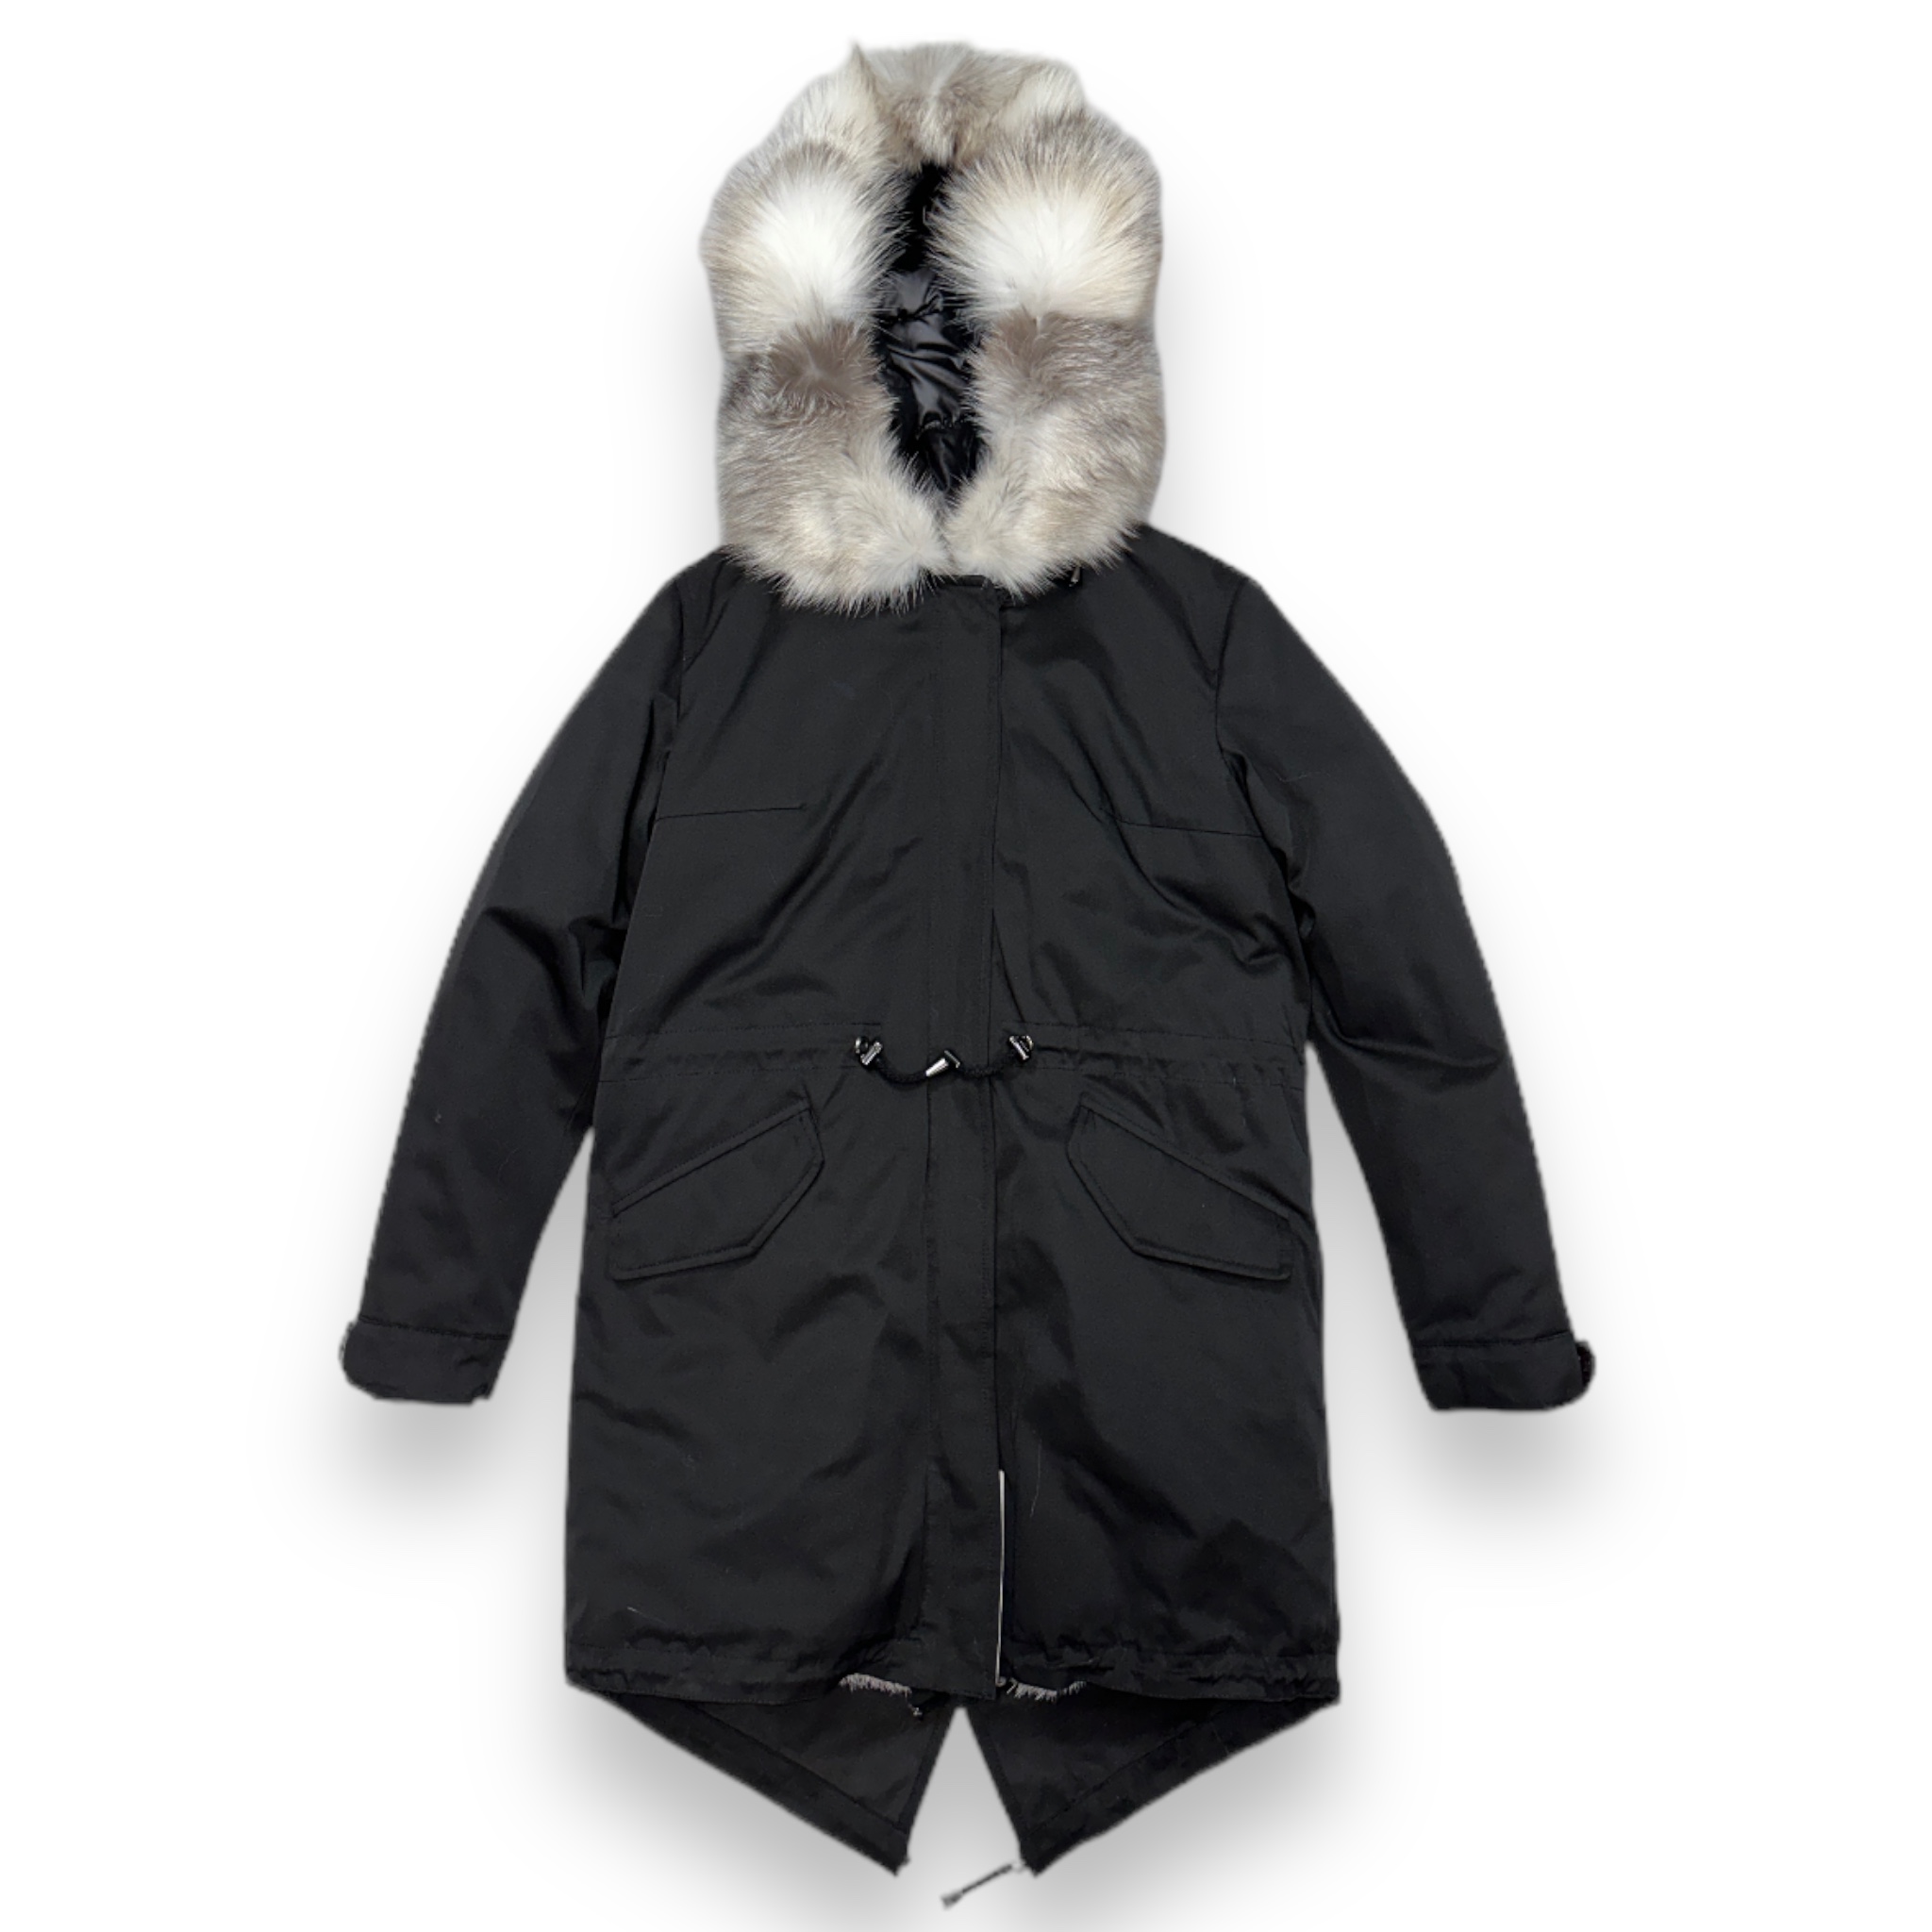 Black Parka with White Fox Hood - Daniel's Leather